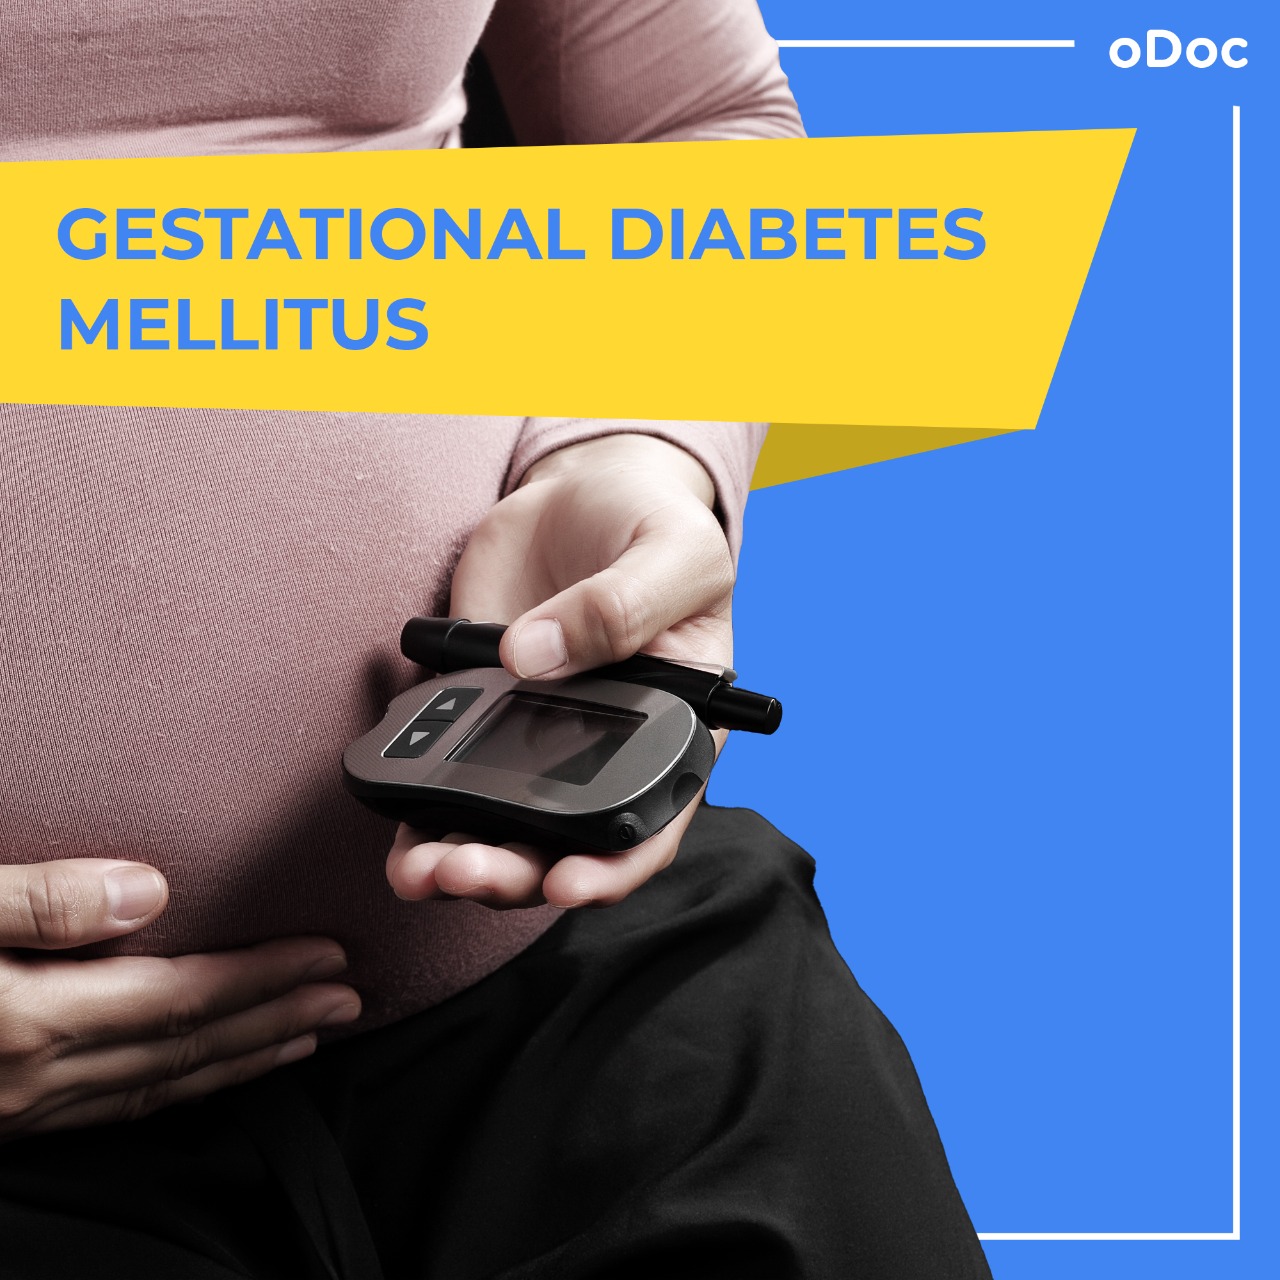 All you need to know about Gestational Diabetes